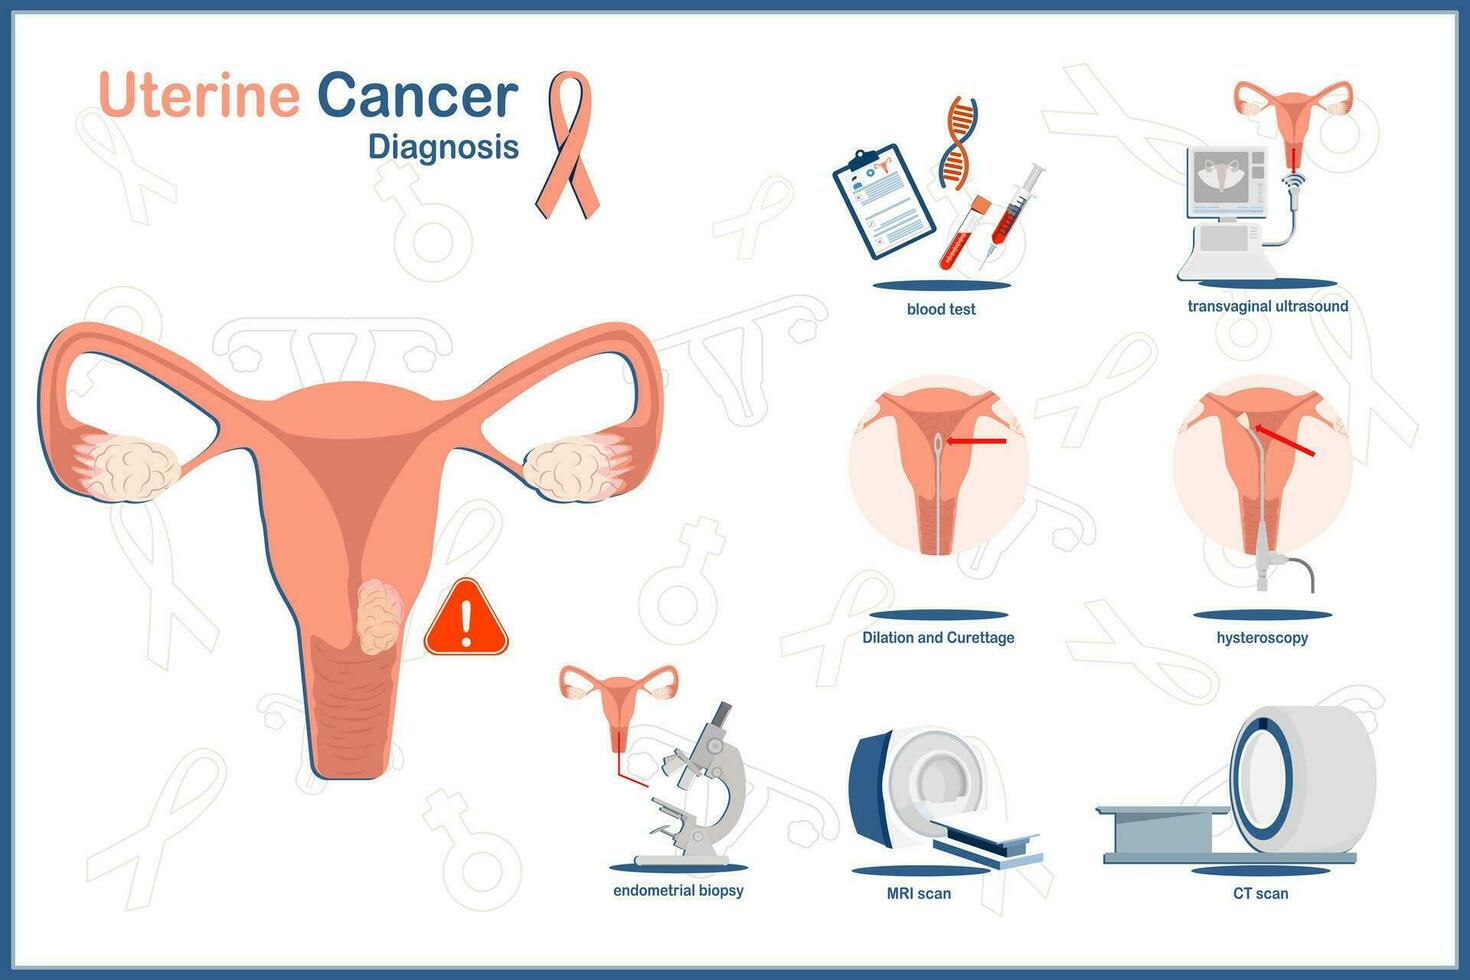 Flat medical vector illustration concept of uterine cancer.Uterus and uterine cancer diagnosis.blood test,CT scan,MRI scan,ultrasound,endometrial biopsy,hysteroscopy,dilation and curettage.